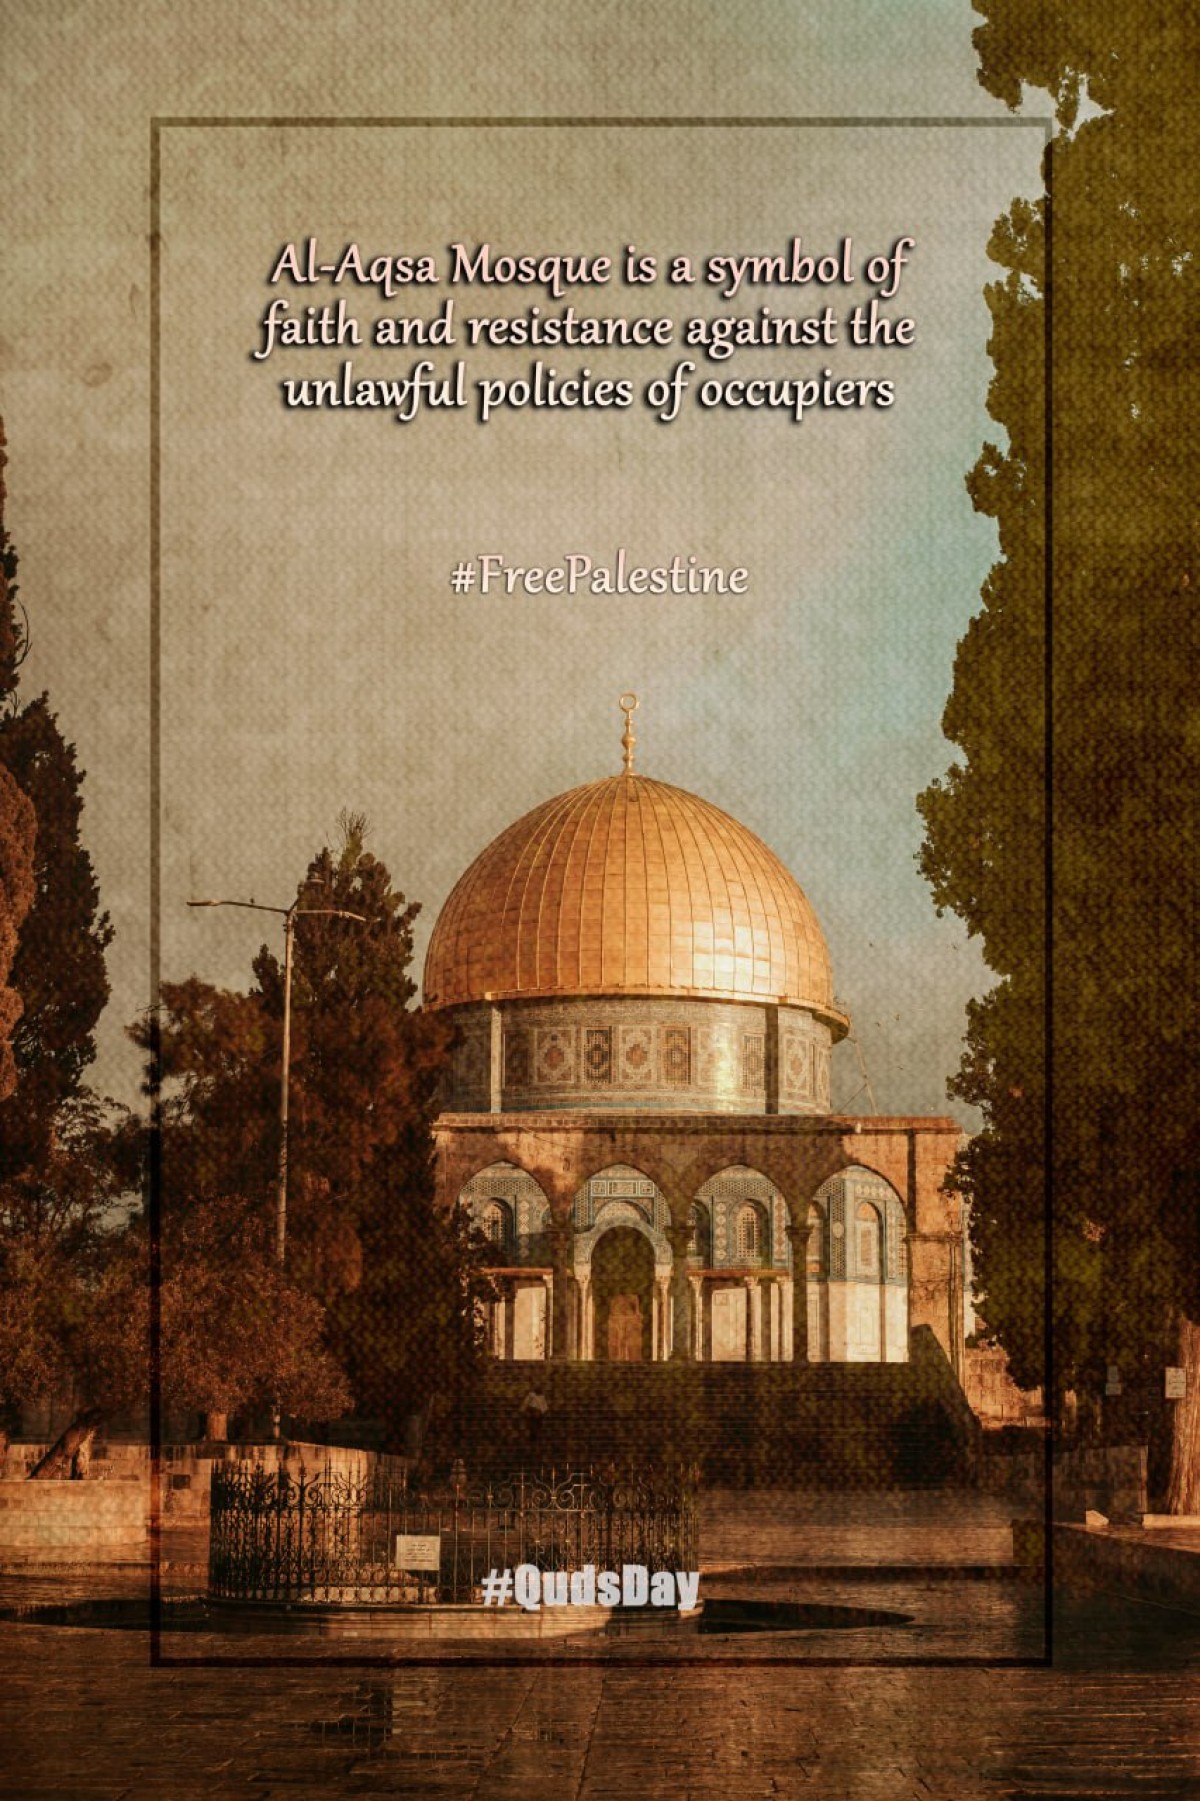 Al-Aqsa Mosque is a symbol of faith and resistance against the unlawful policies of occupiers